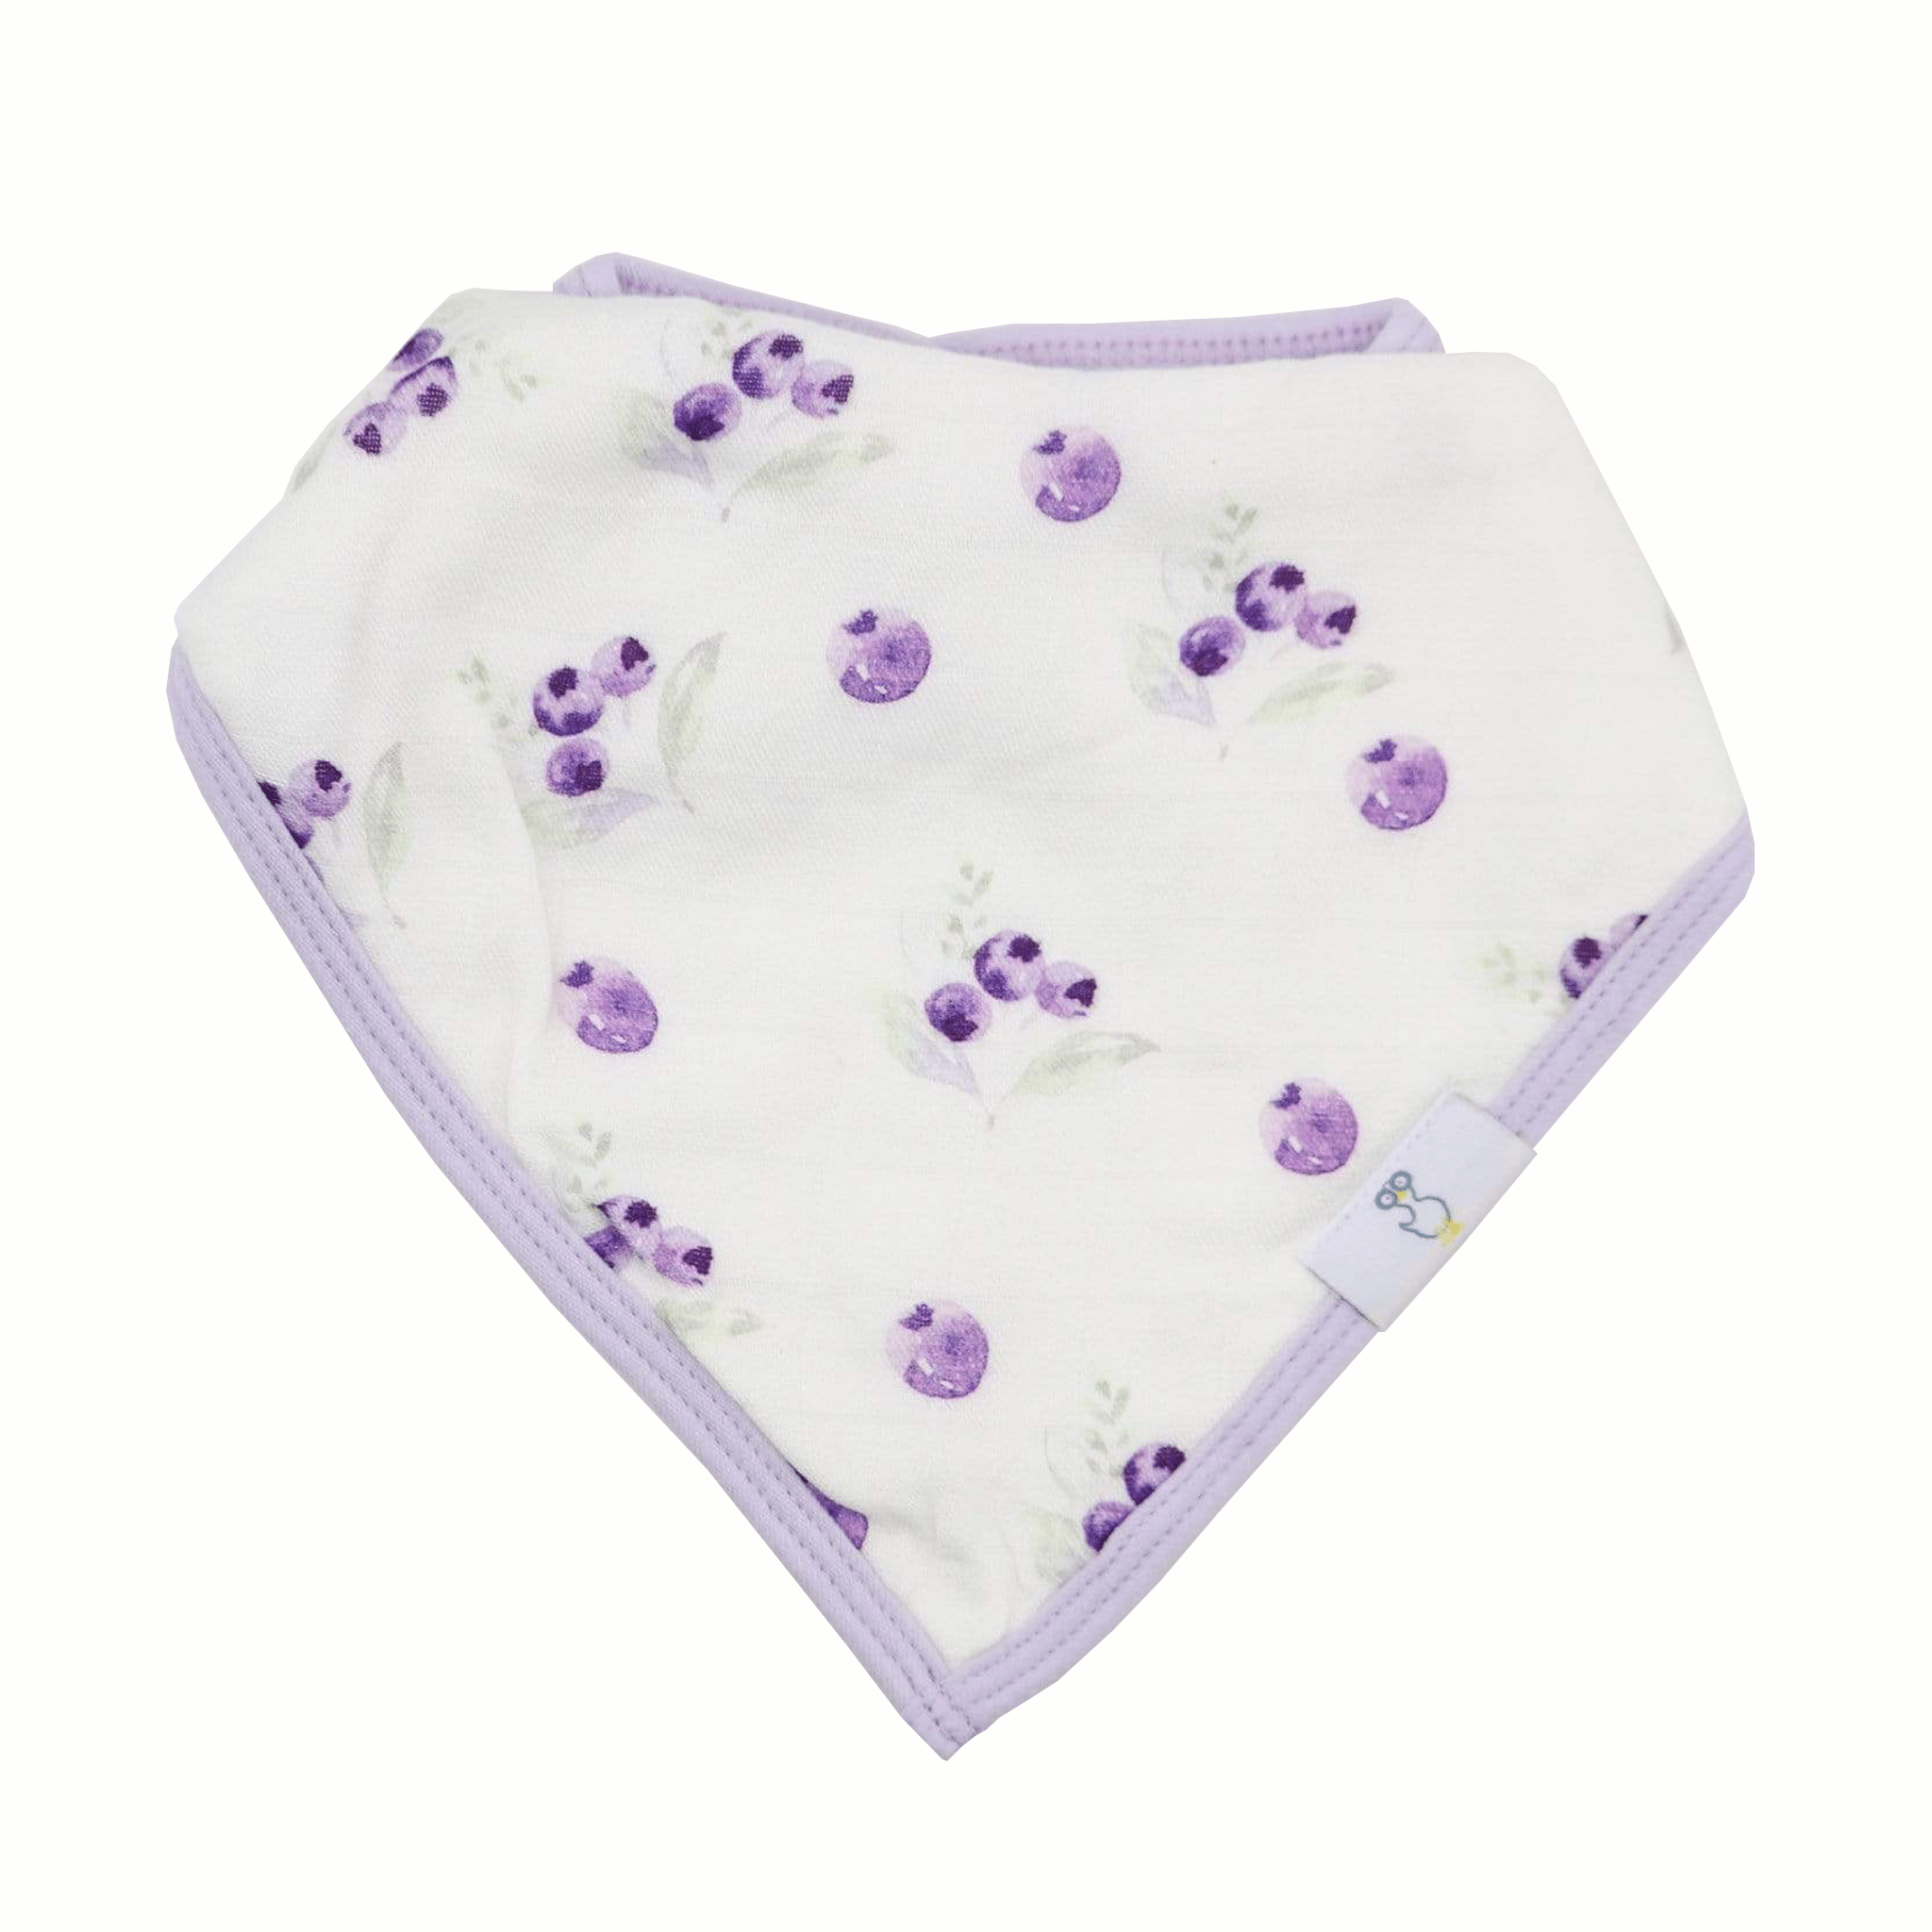 Blueberries And Flowers Lavender2 Pack Muslin & Terry Cloth Bib Set